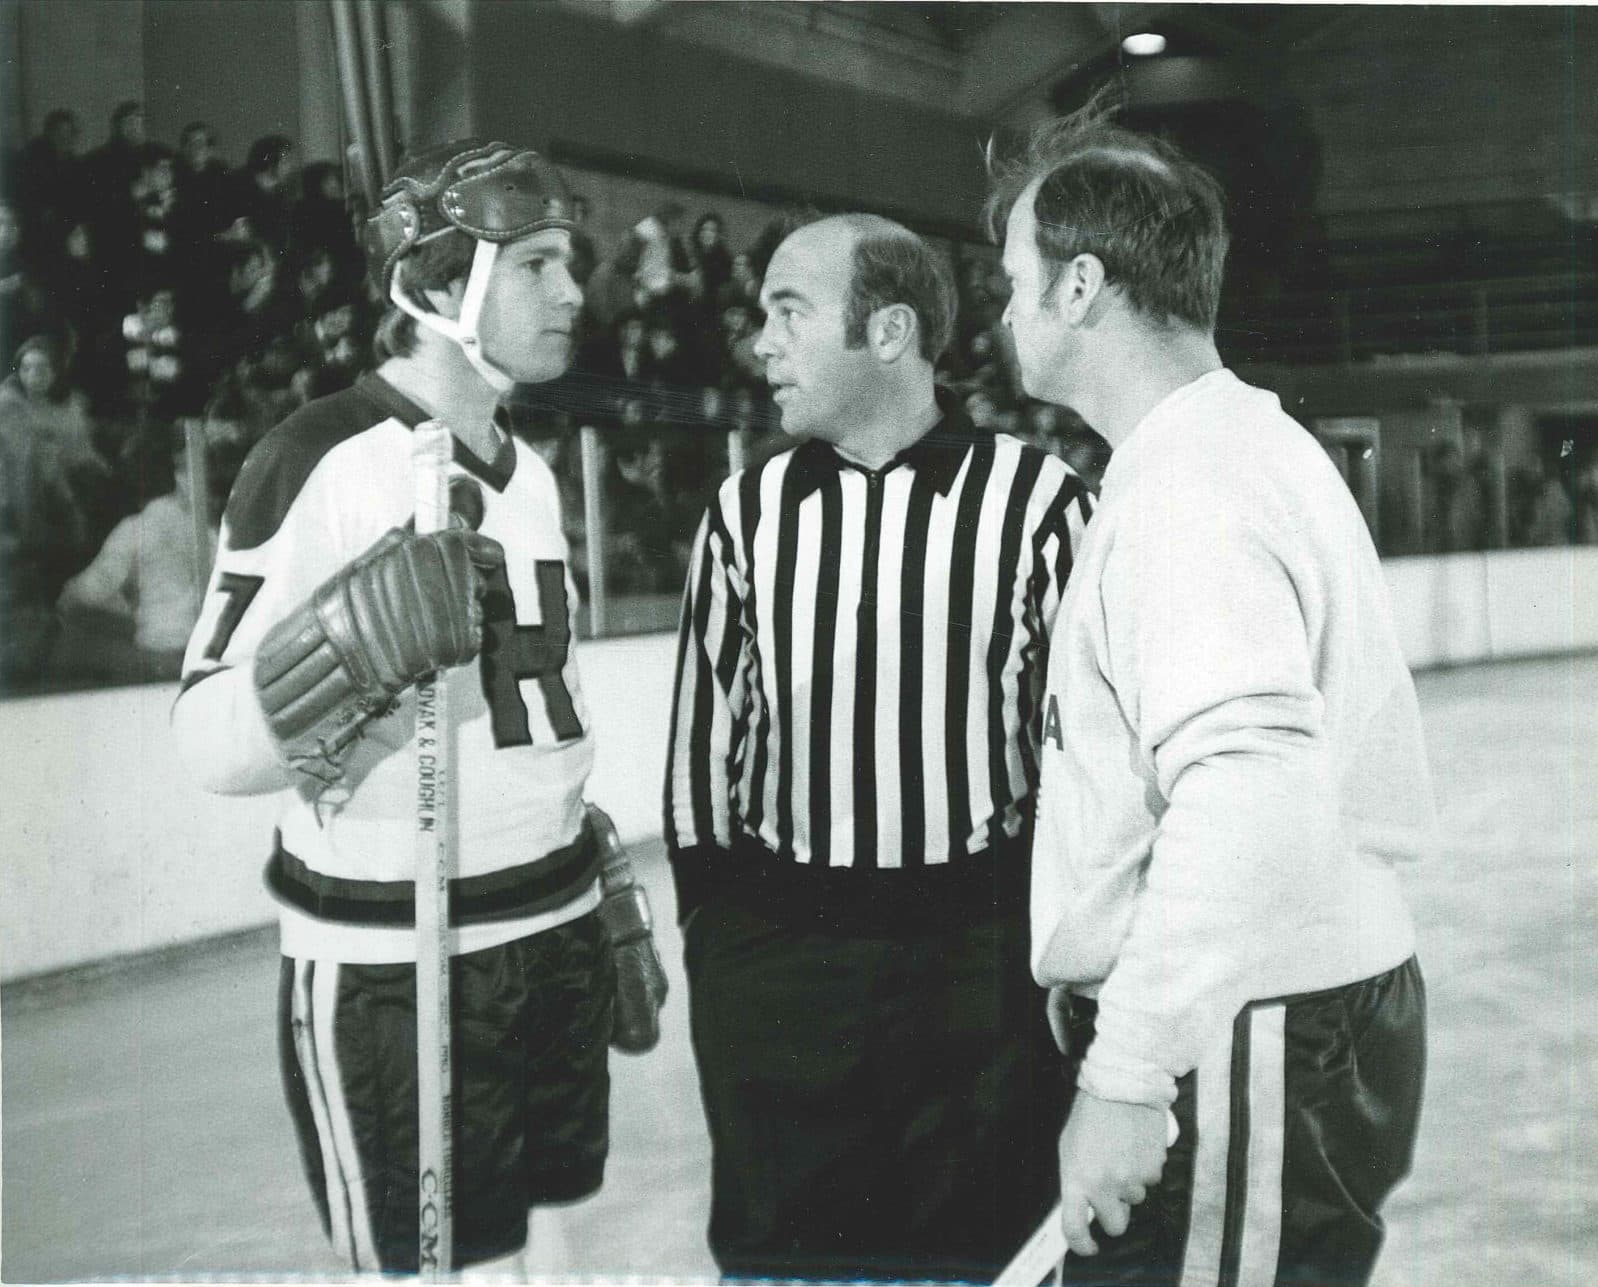 Ryan O'Neal (left) on the set of &quot;Love Story&quot;, taking advice (or not) from skating advisers Bob Cleary (in ref's jersey) and his brother, Bill Cleary. (Courtesy Bill Cleary)